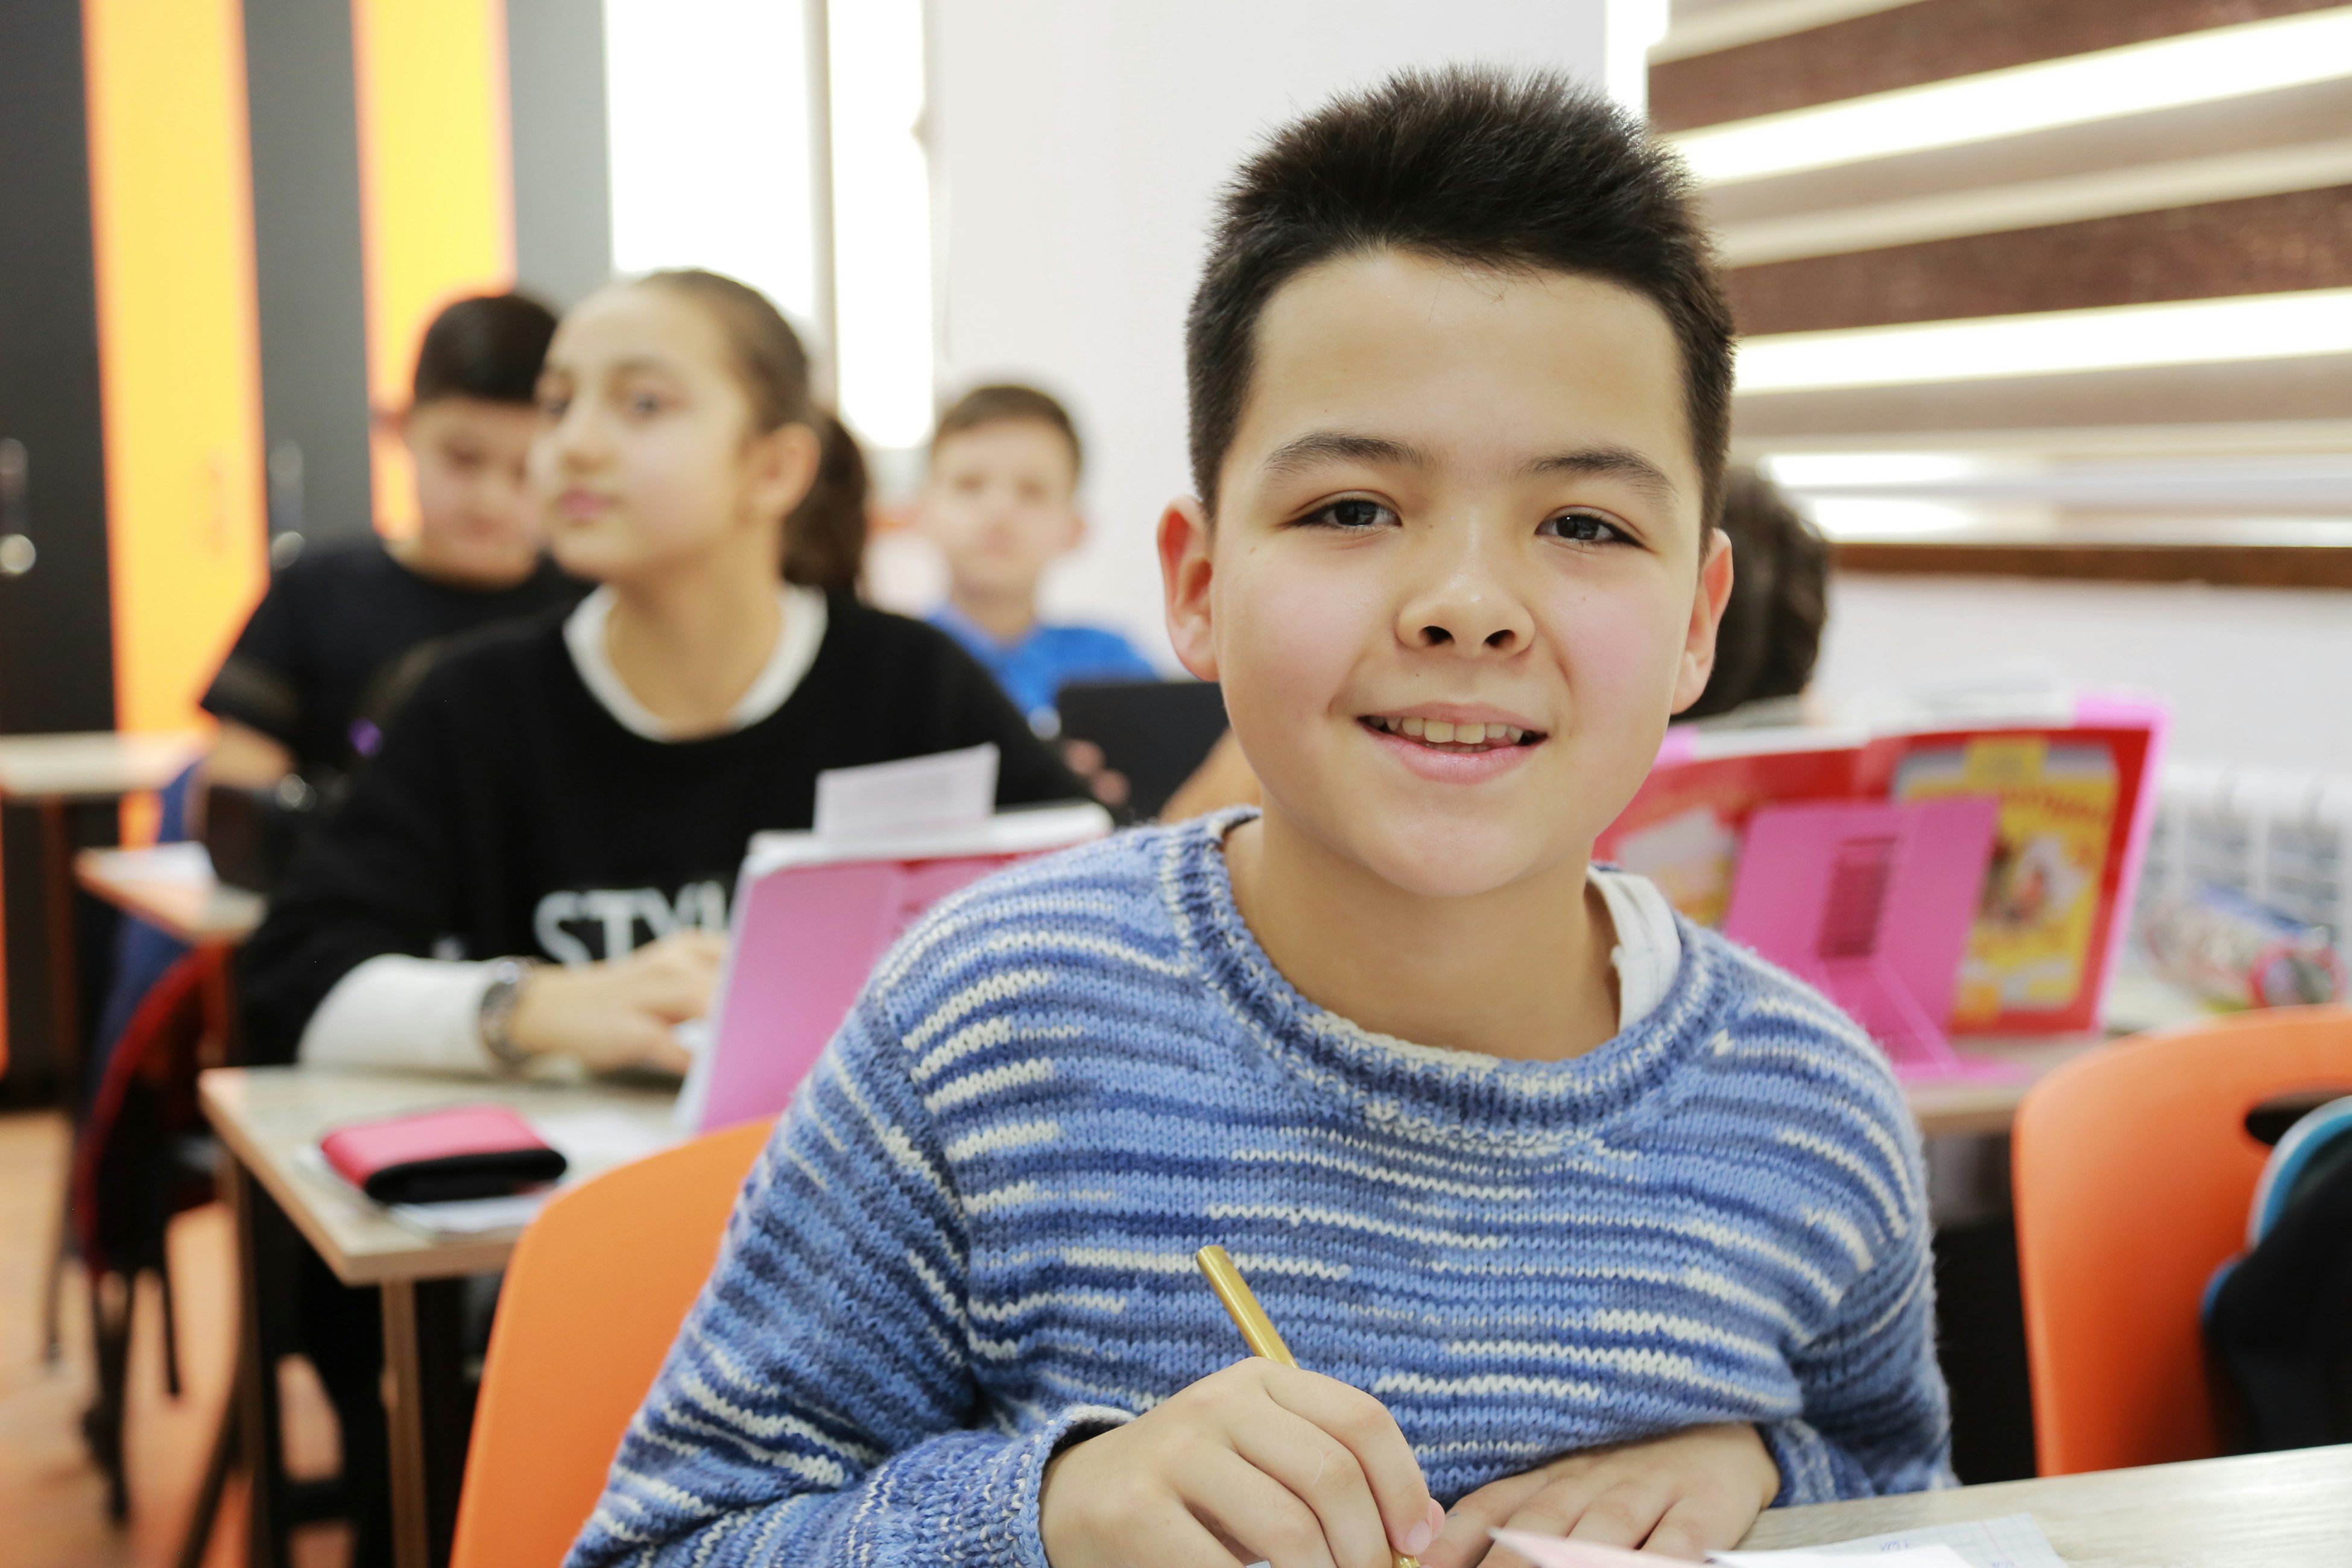 Photo of boy in blue and white striped long sleeve shirt holding pencil while sitting in classroom.